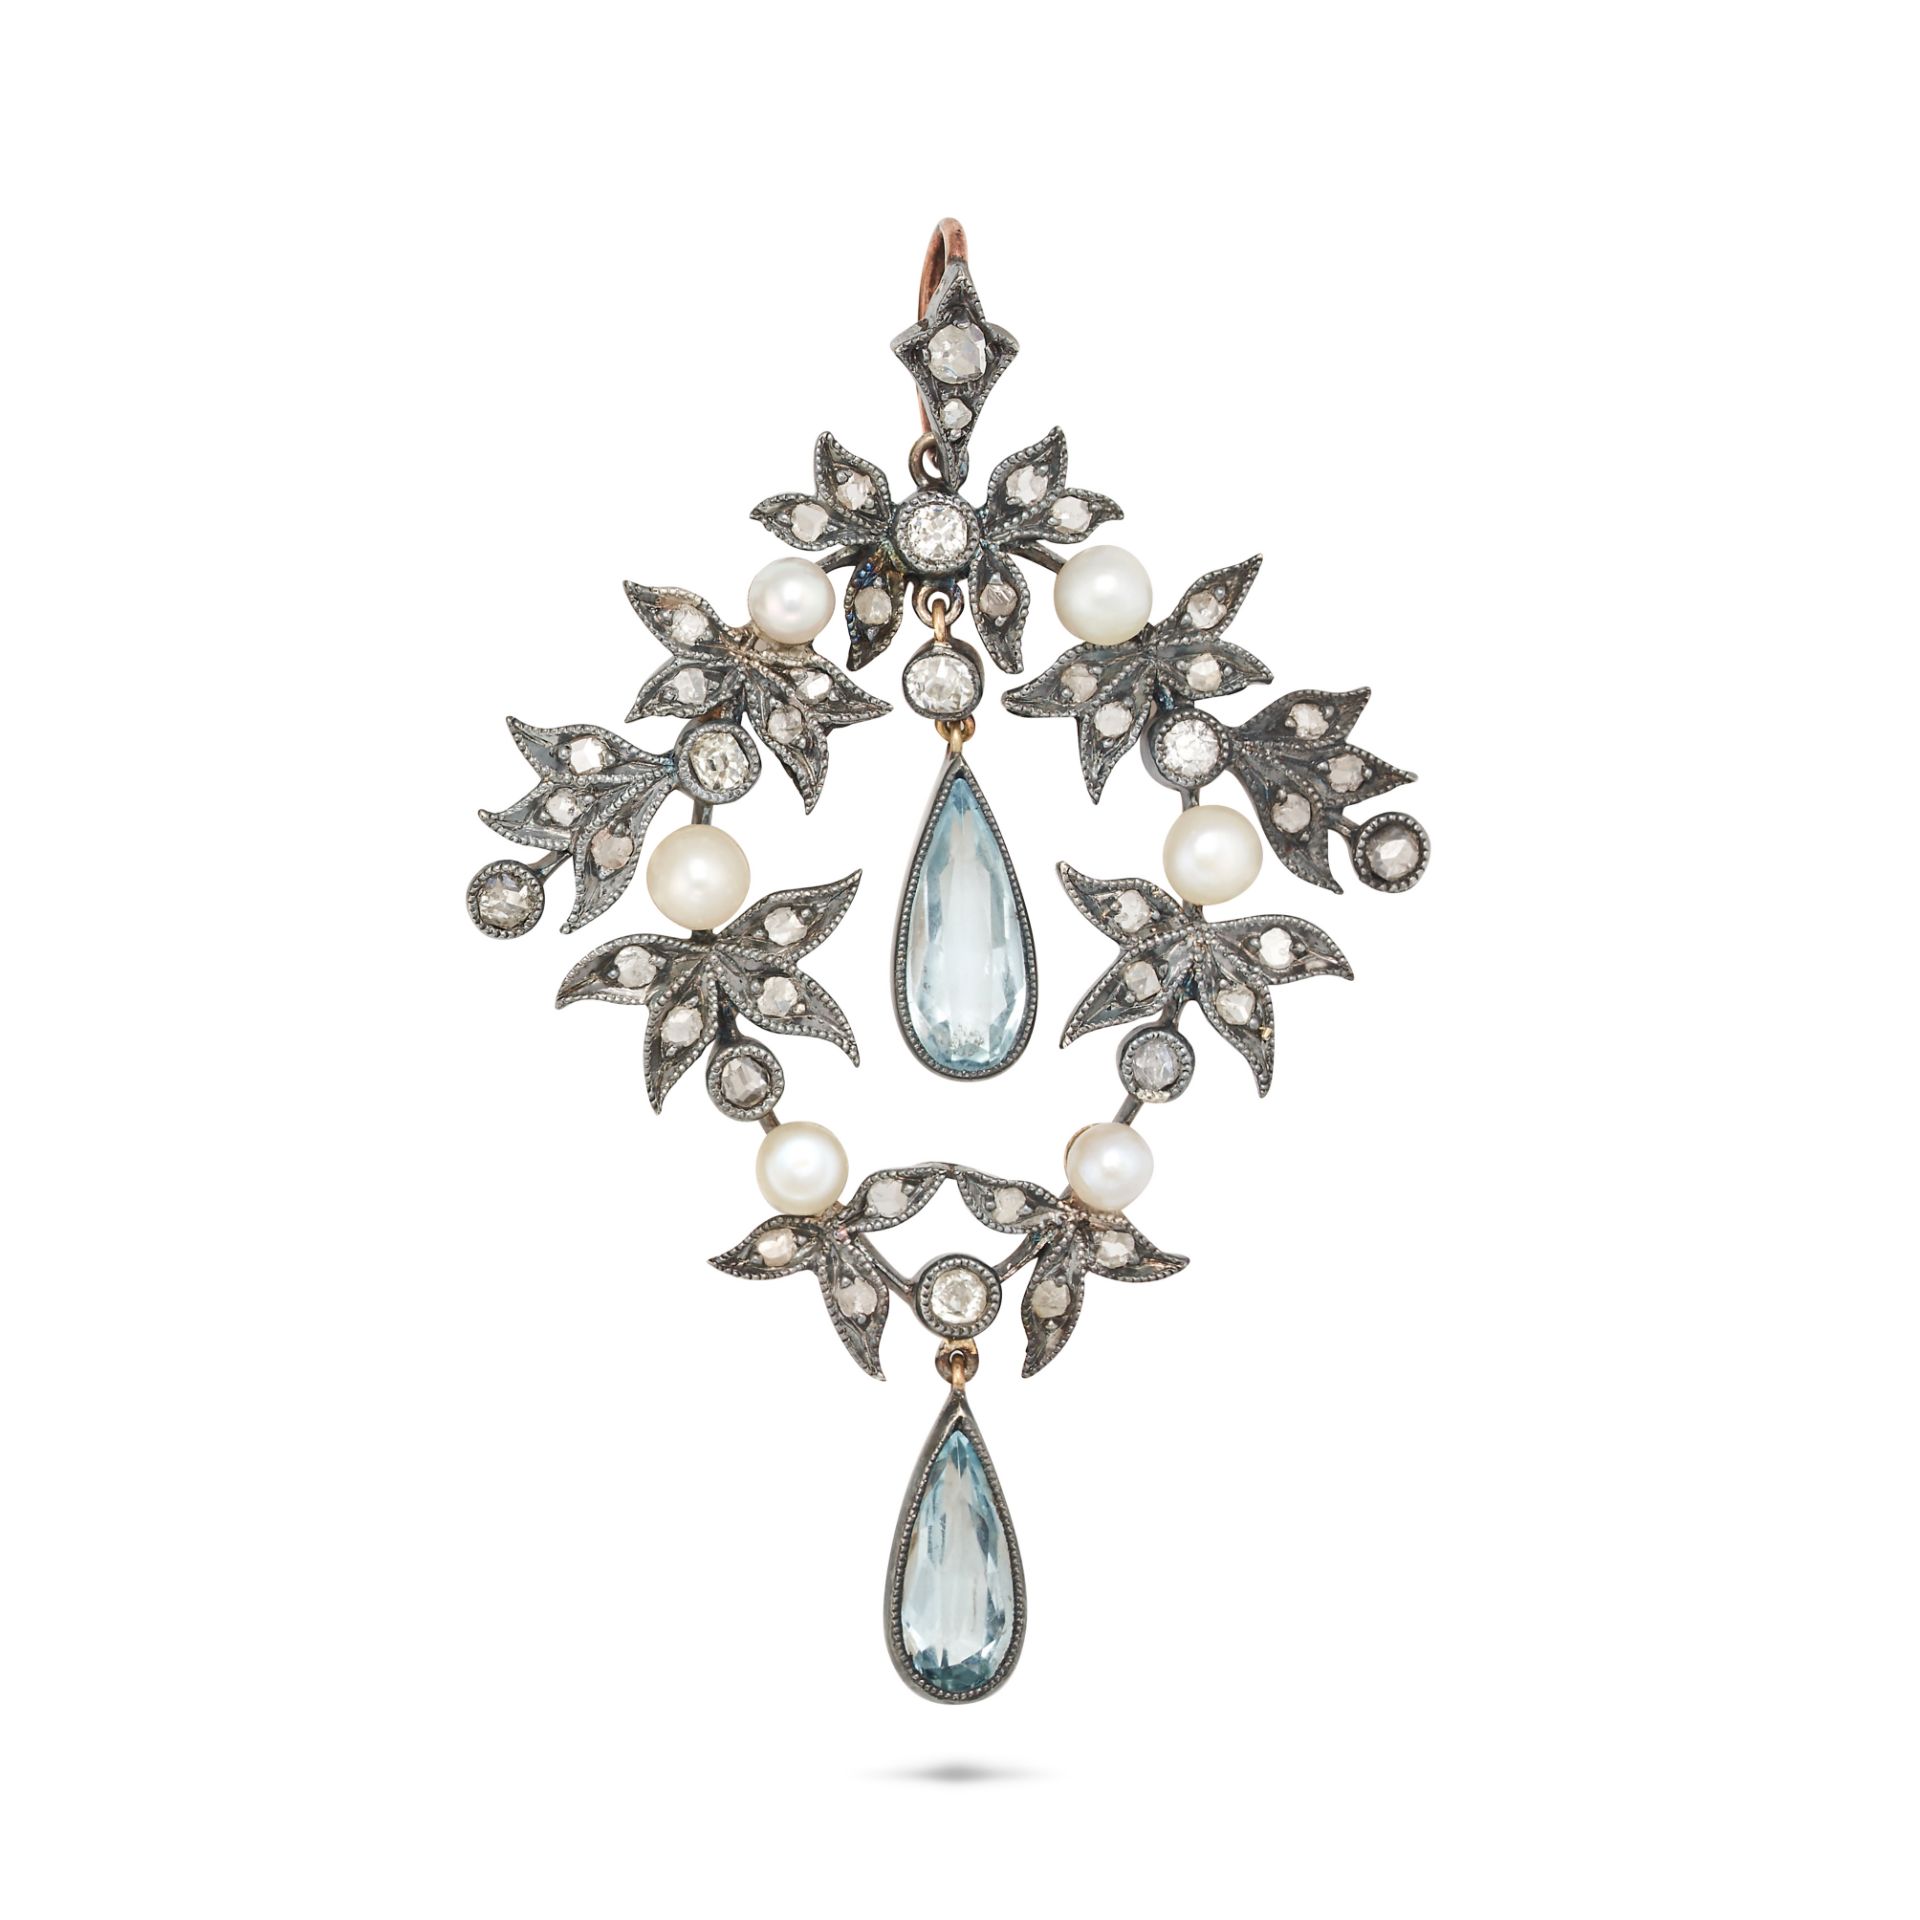 AN ANTIQUE AQUAMARINE, DIAMOND AND PEARL PENDANT in rose gold and silver, designed as a wreath se...